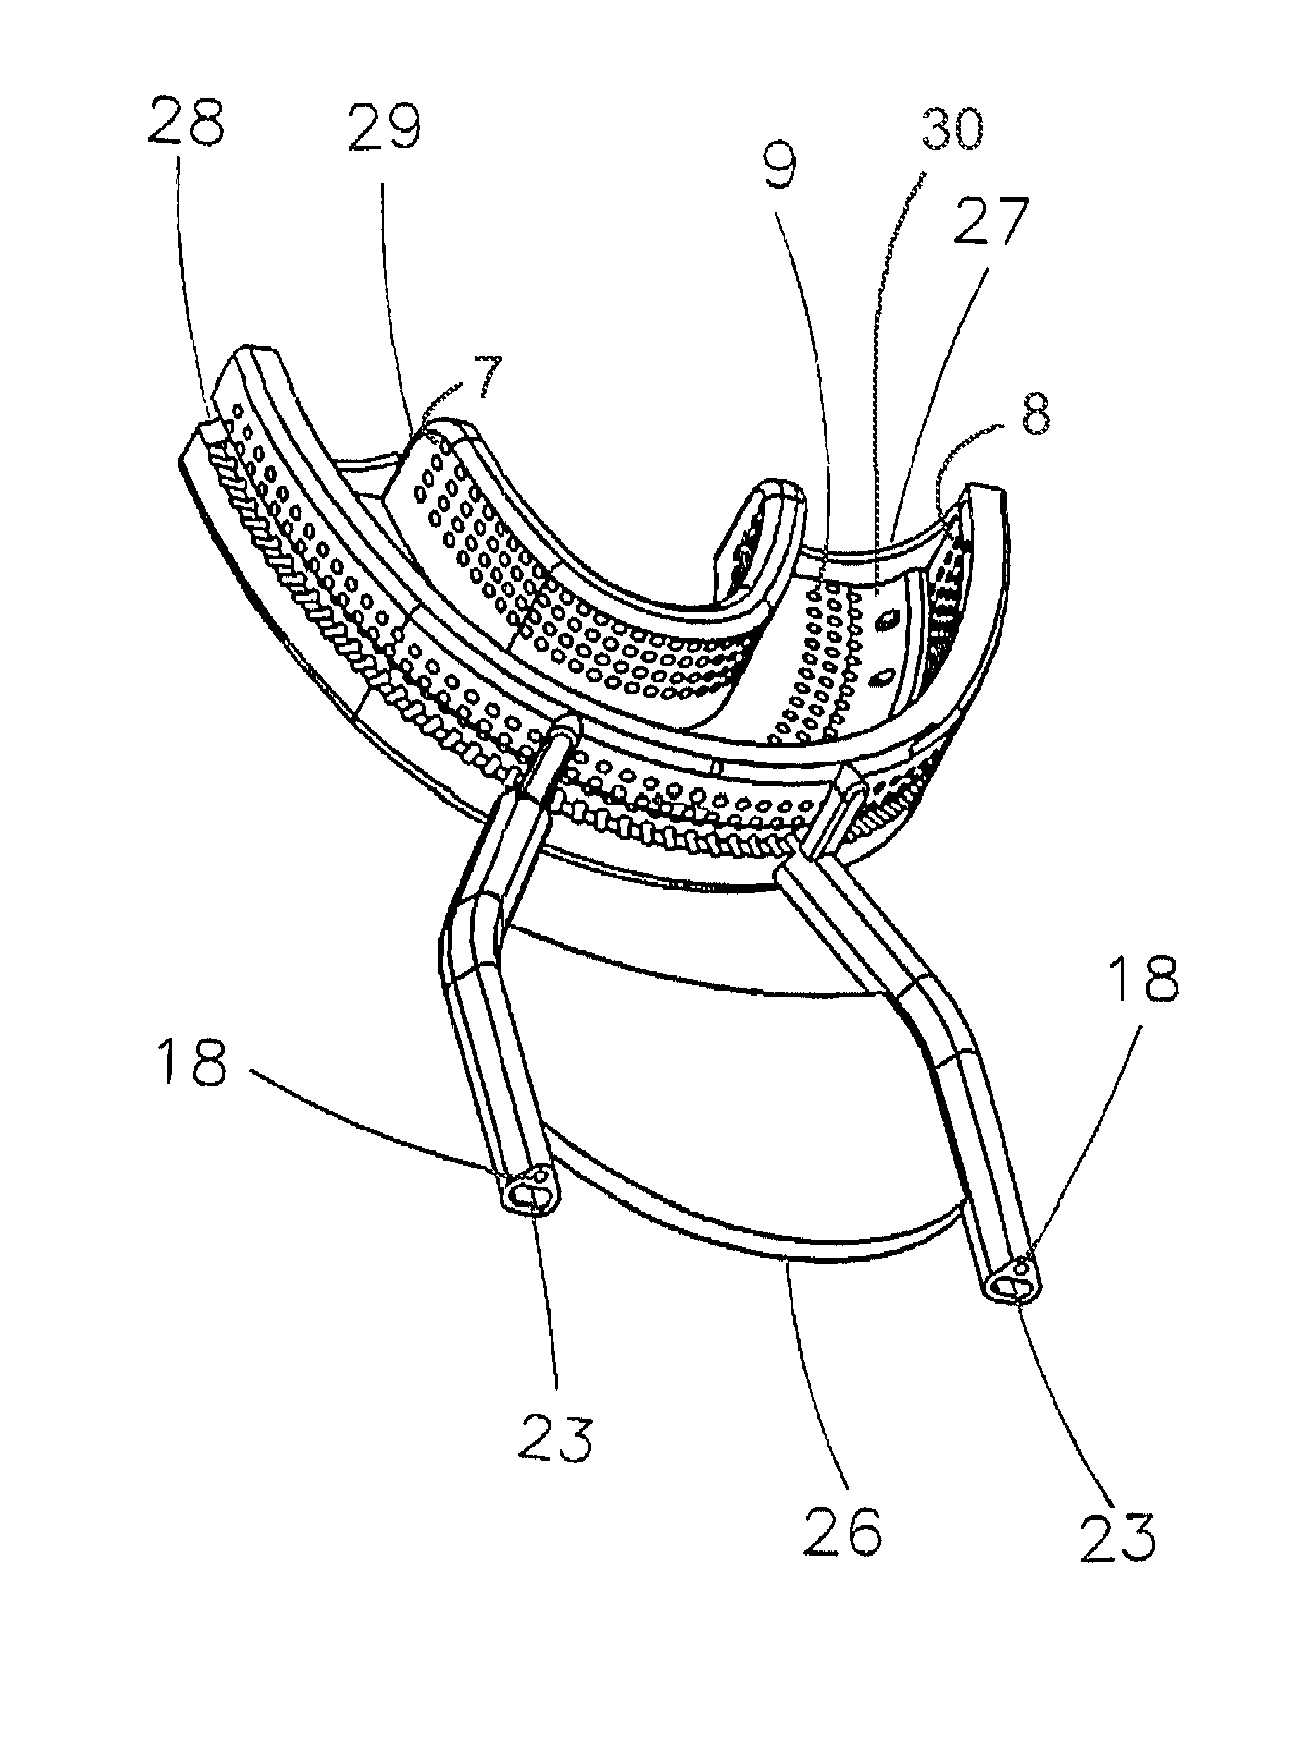 Oral Care System With Mouthpiece